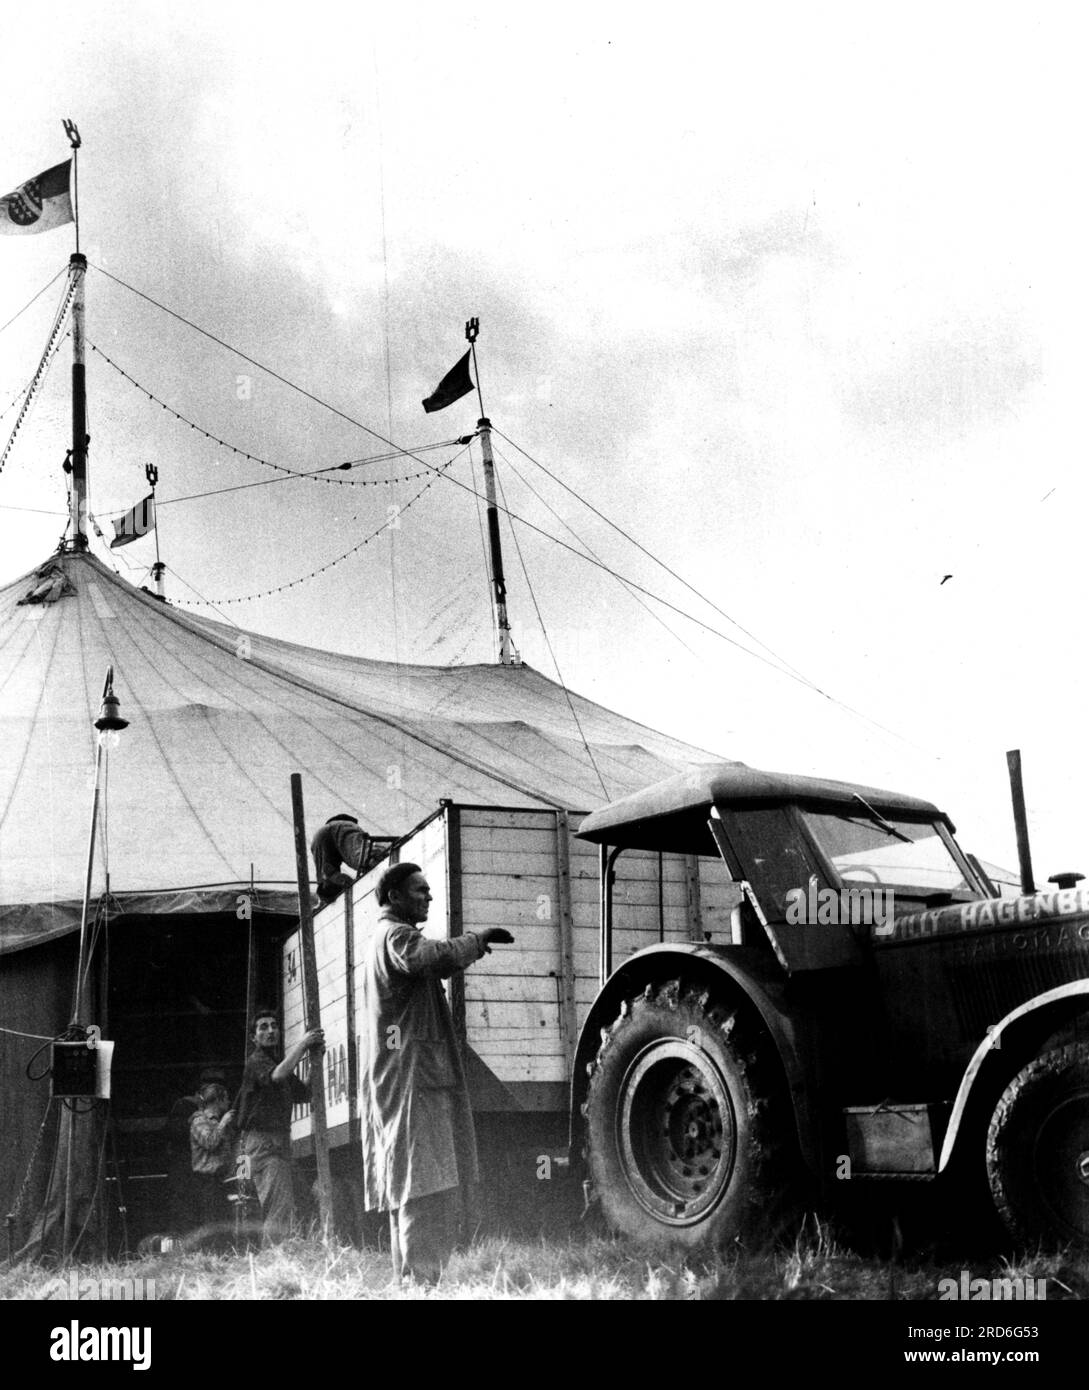 circus, Circus Willy Hagenbeck, circus tent, exterior view, trailer with equipment at emergency exit, ADDITIONAL-RIGHTS-CLEARANCE-INFO-NOT-AVAILABLE Stock Photo